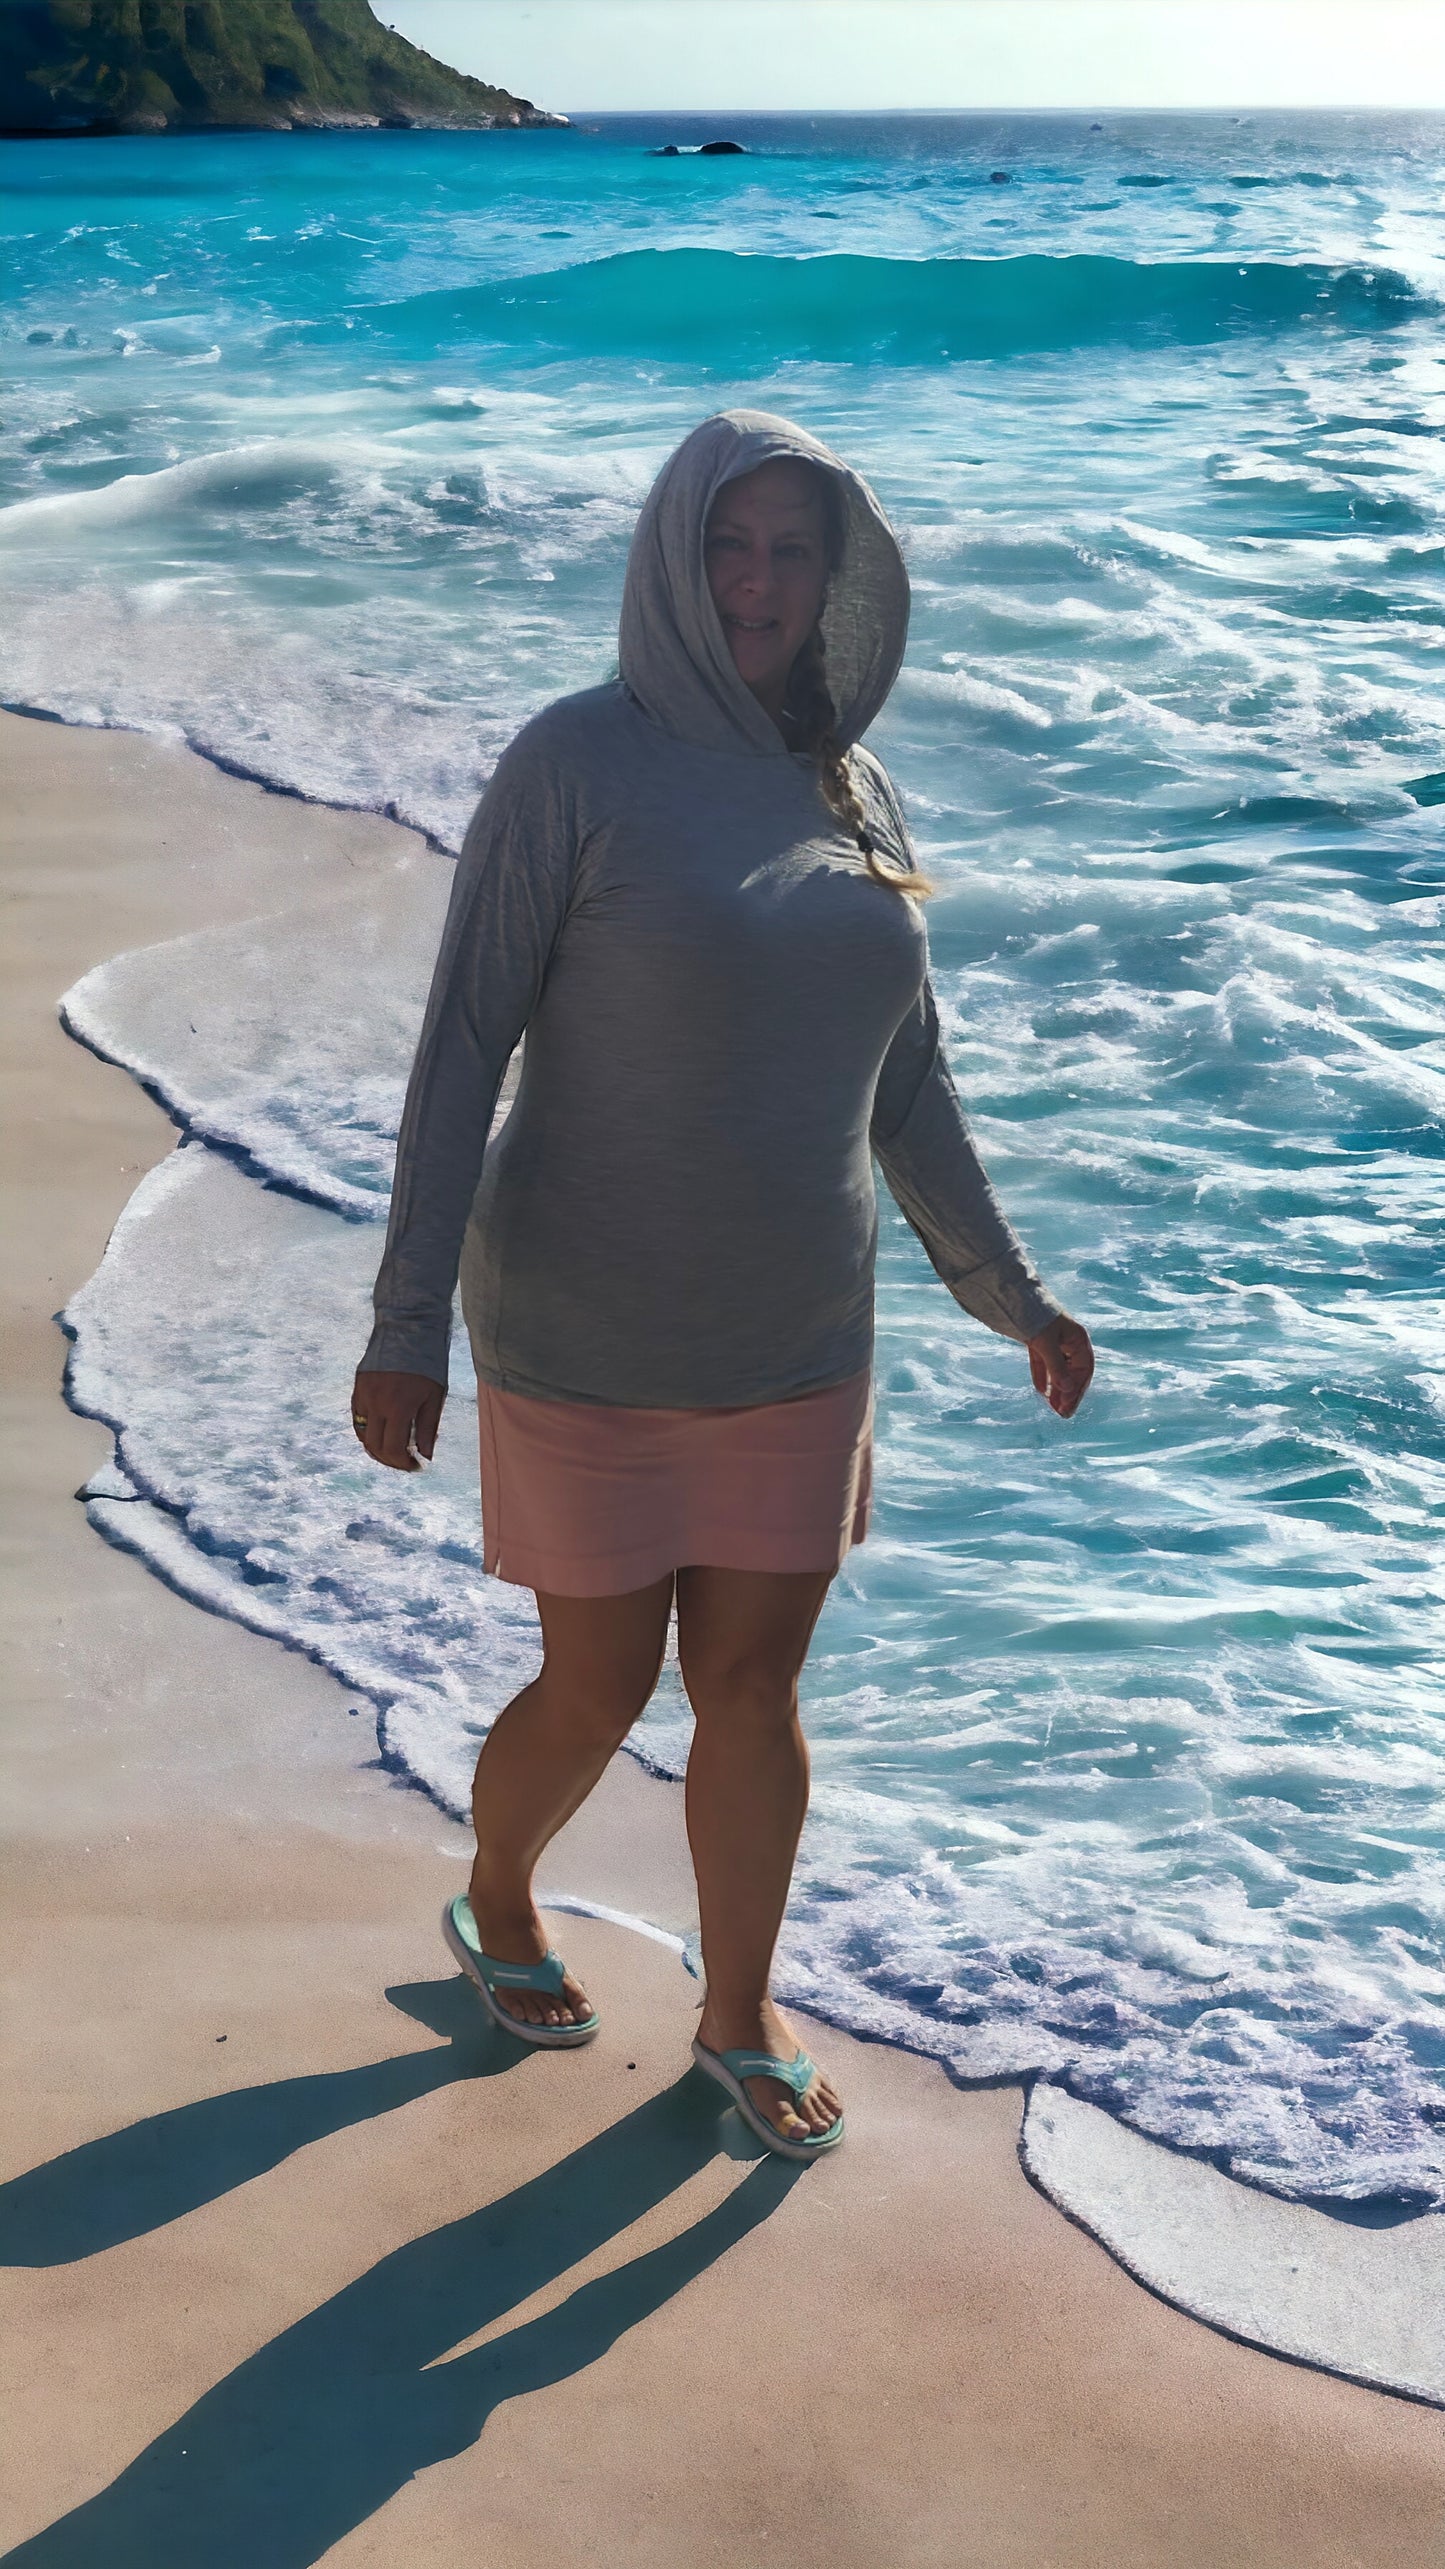 New Bamboo Hoodie - Grey - UV 50 Protection & Breathable - Sizes XS-3XL